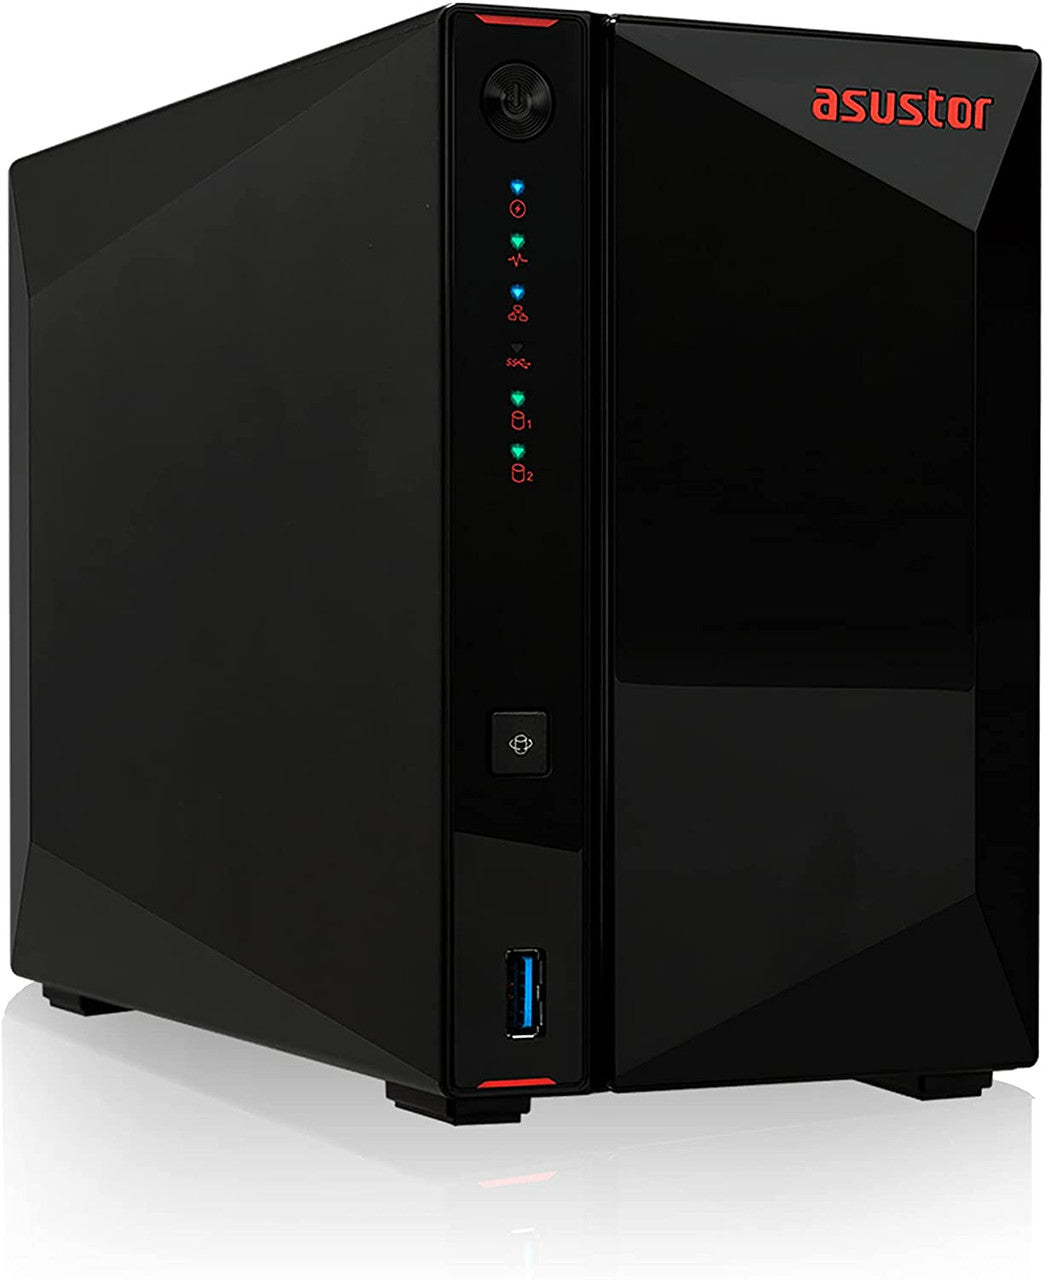 Asustor AS5202T 2-Bay Nimbustor 2 NAS with 8GB RAM and 4TB (2 x 2TB) Western Digital RED PRO Drives Fully Assembled and Tested